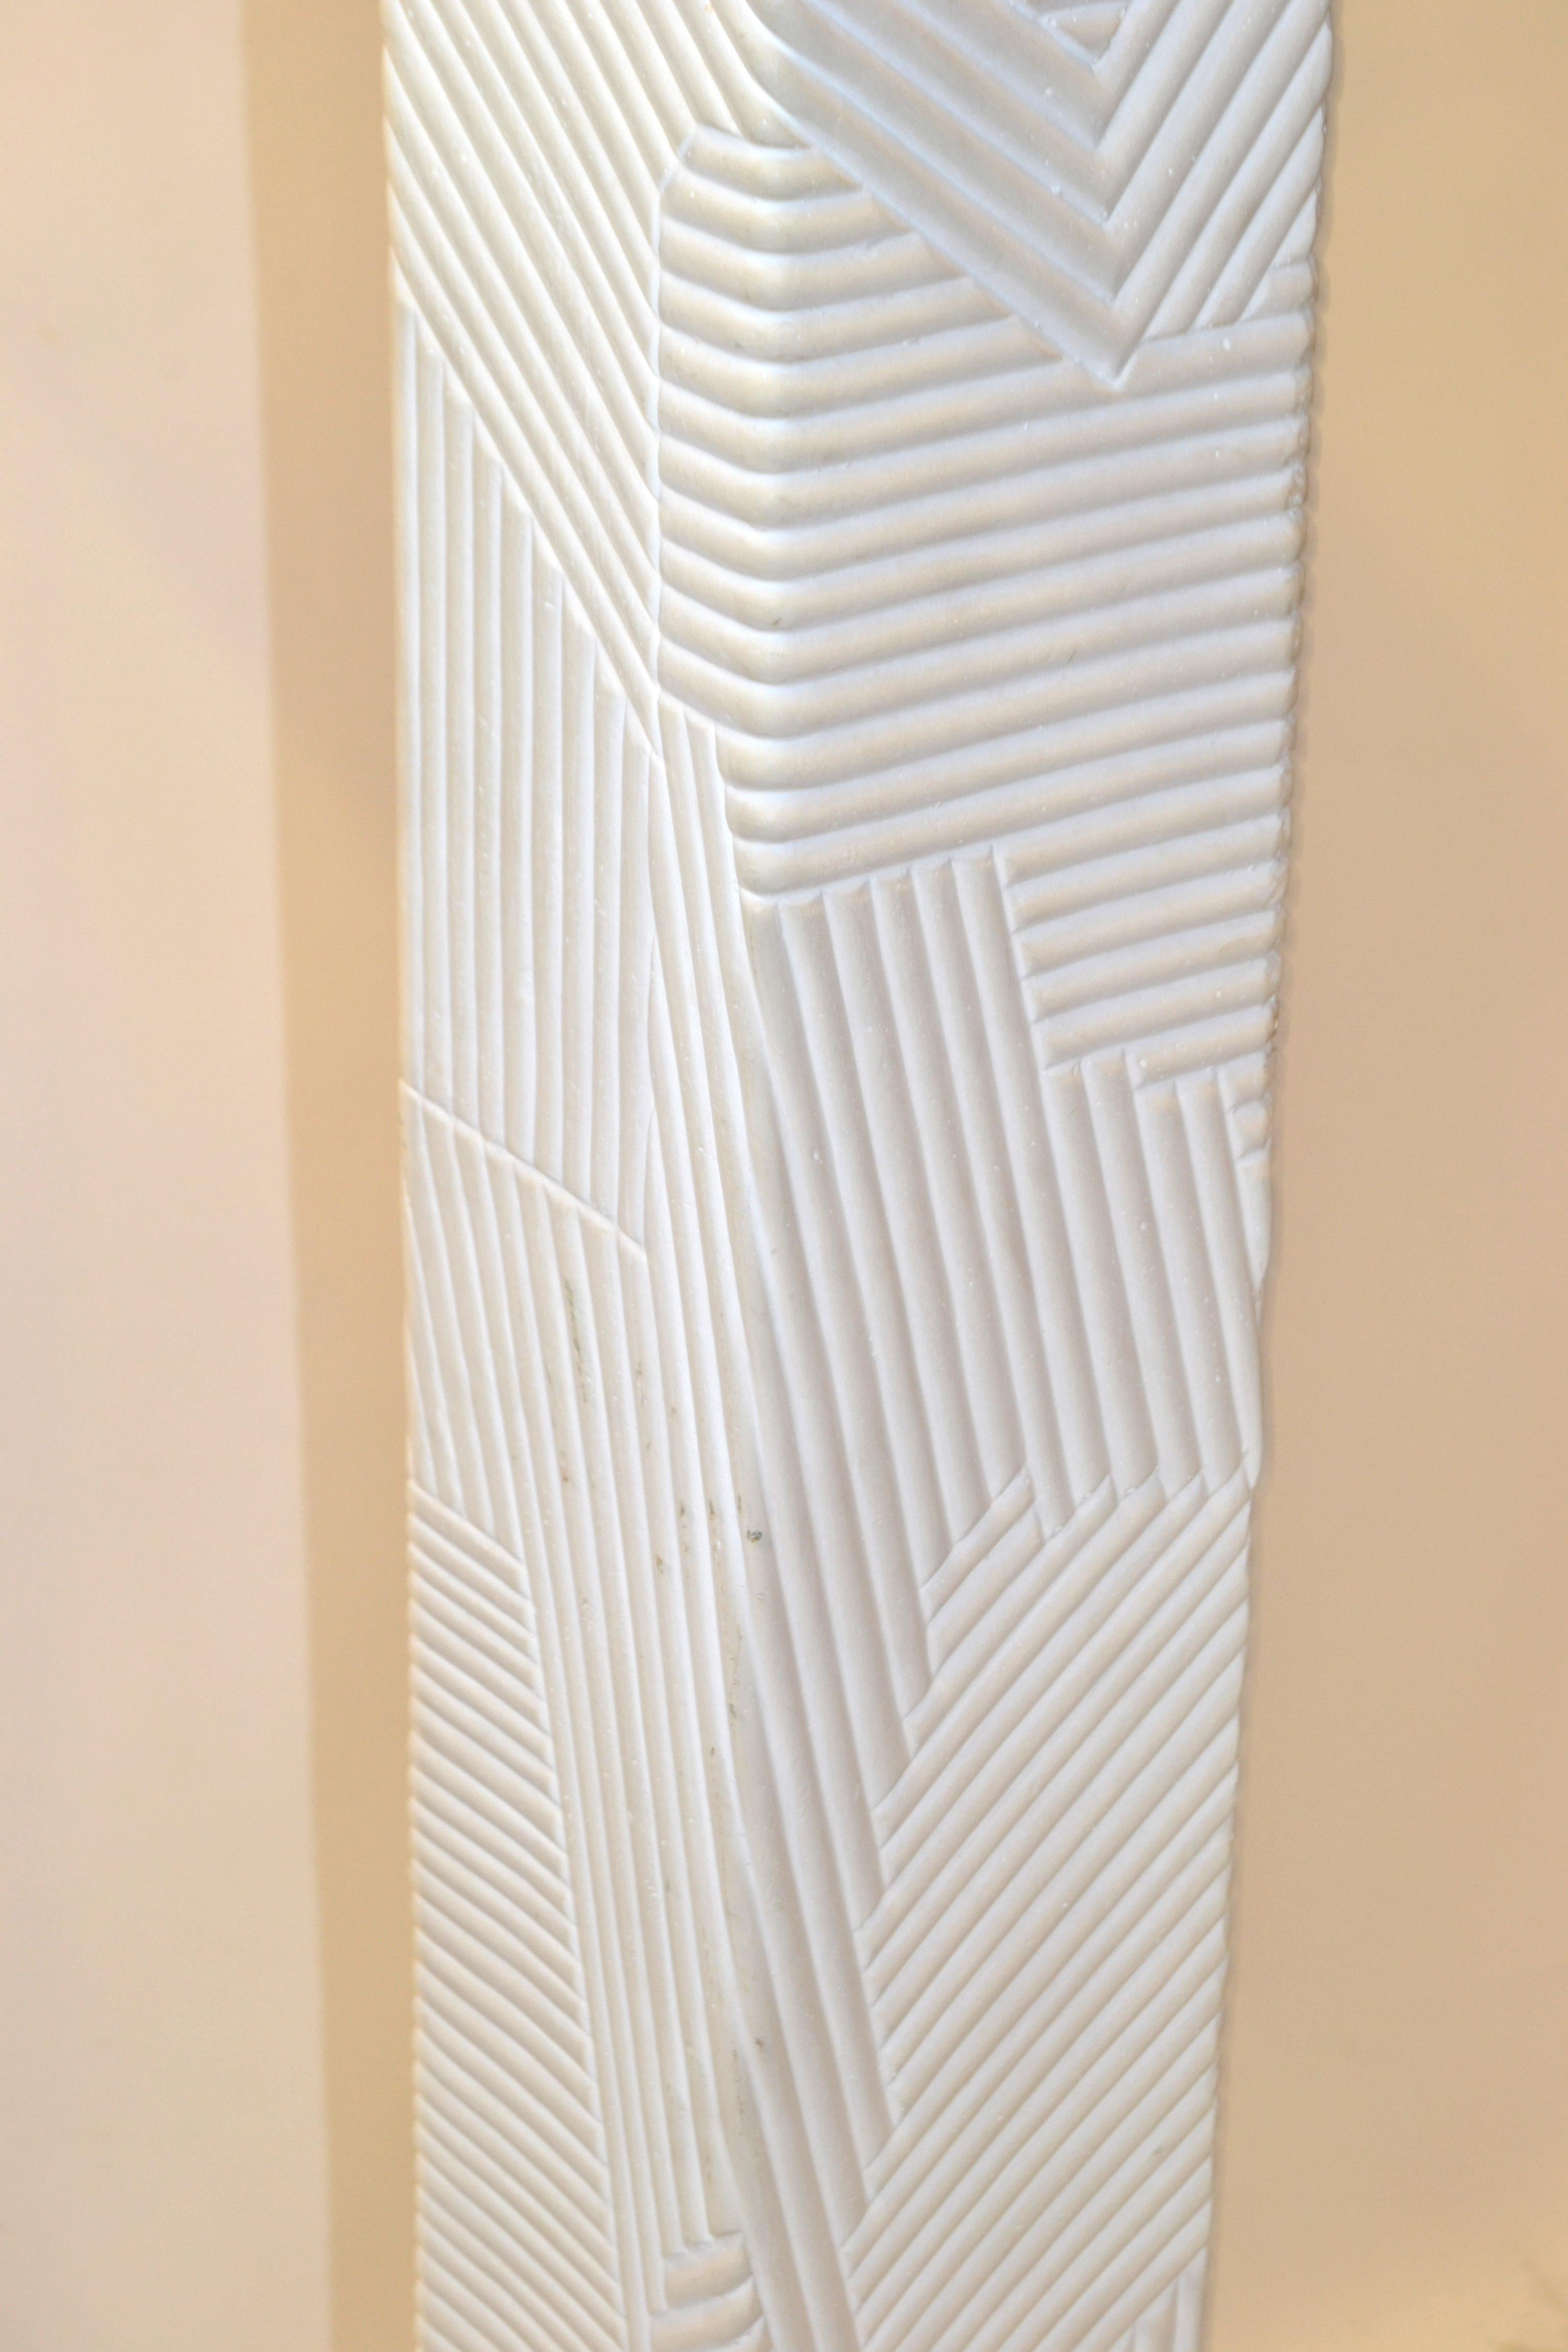 1970 Mid-Century Modern Geometric Textured Iconic Sculptural Plaster Lamp Sirmos For Sale 5